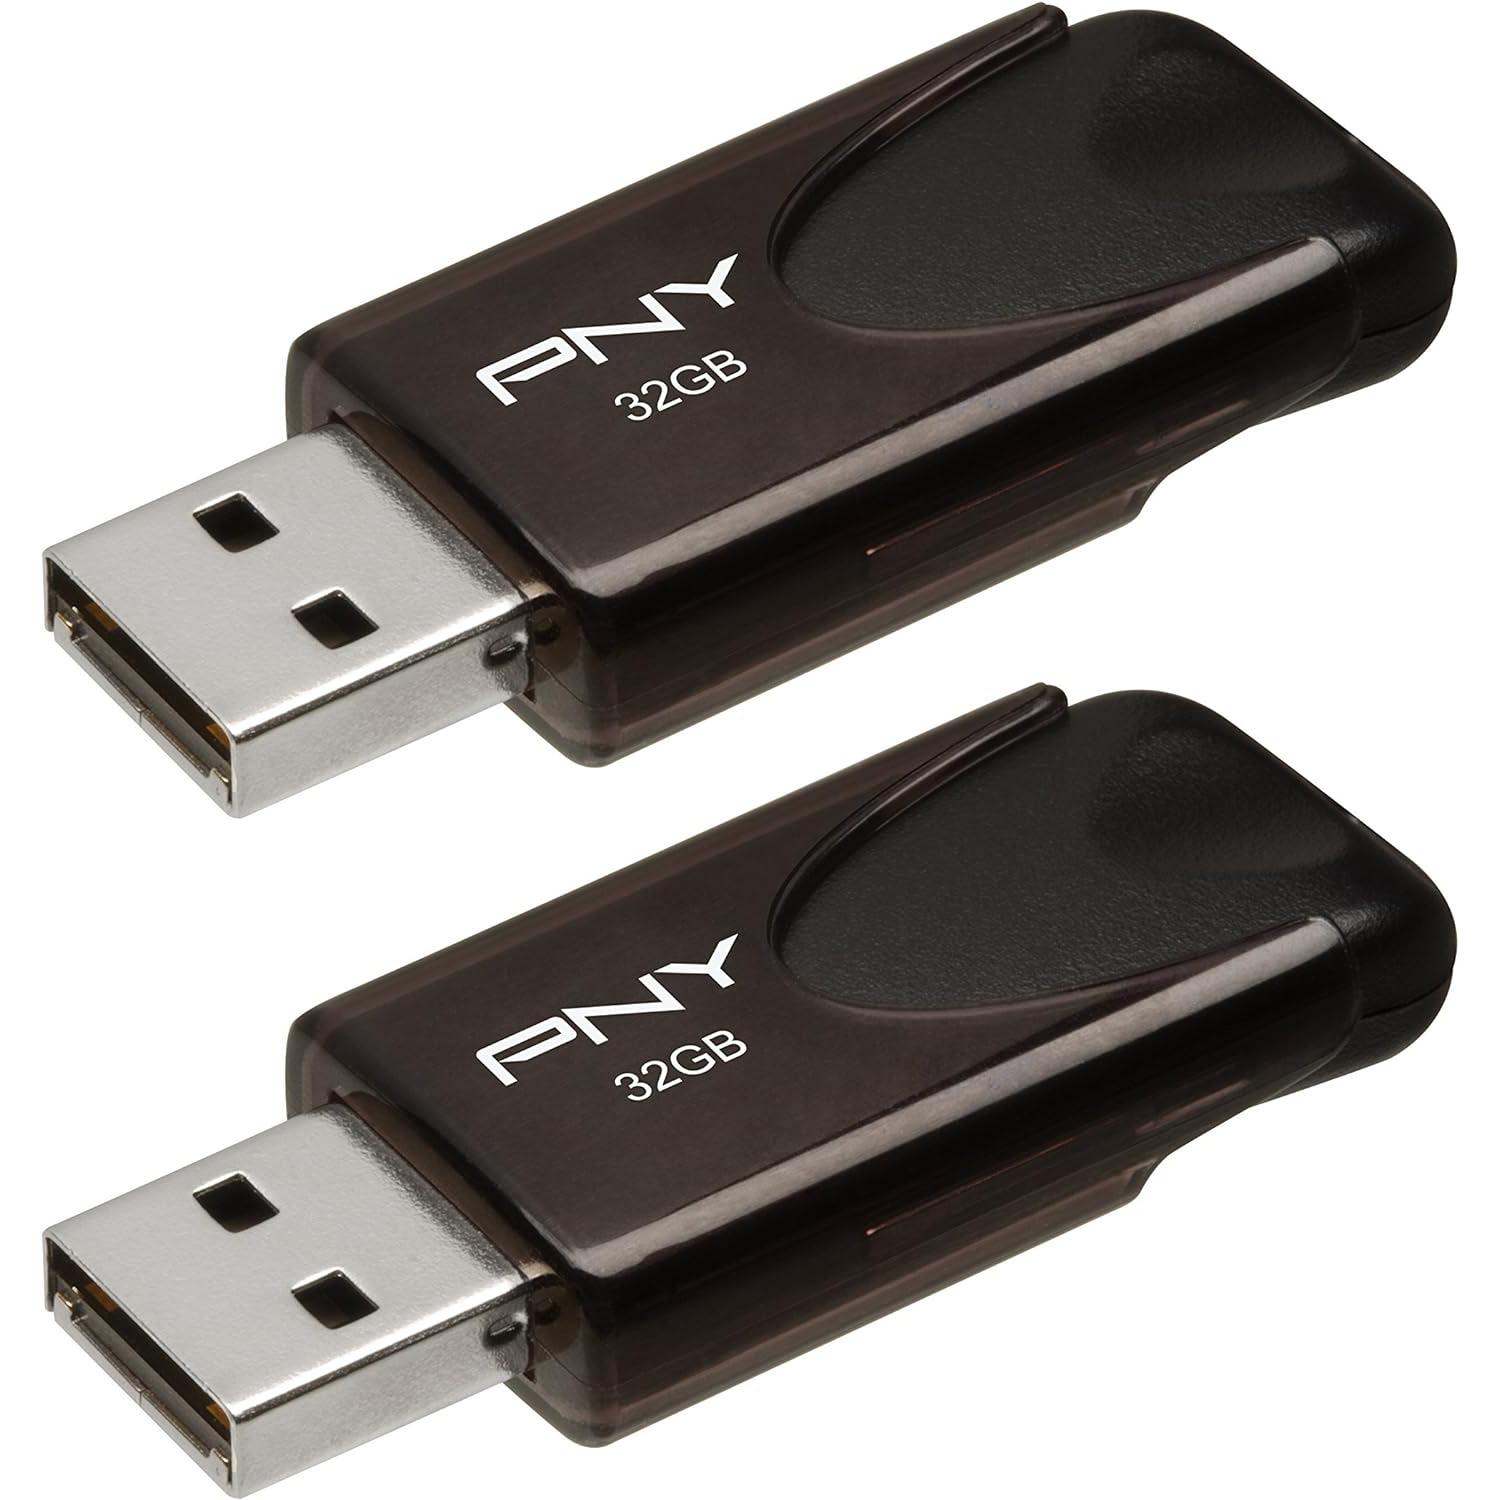 32GB PNY Attache USB 2.0 Flash Drive 2 Pack for $6.99